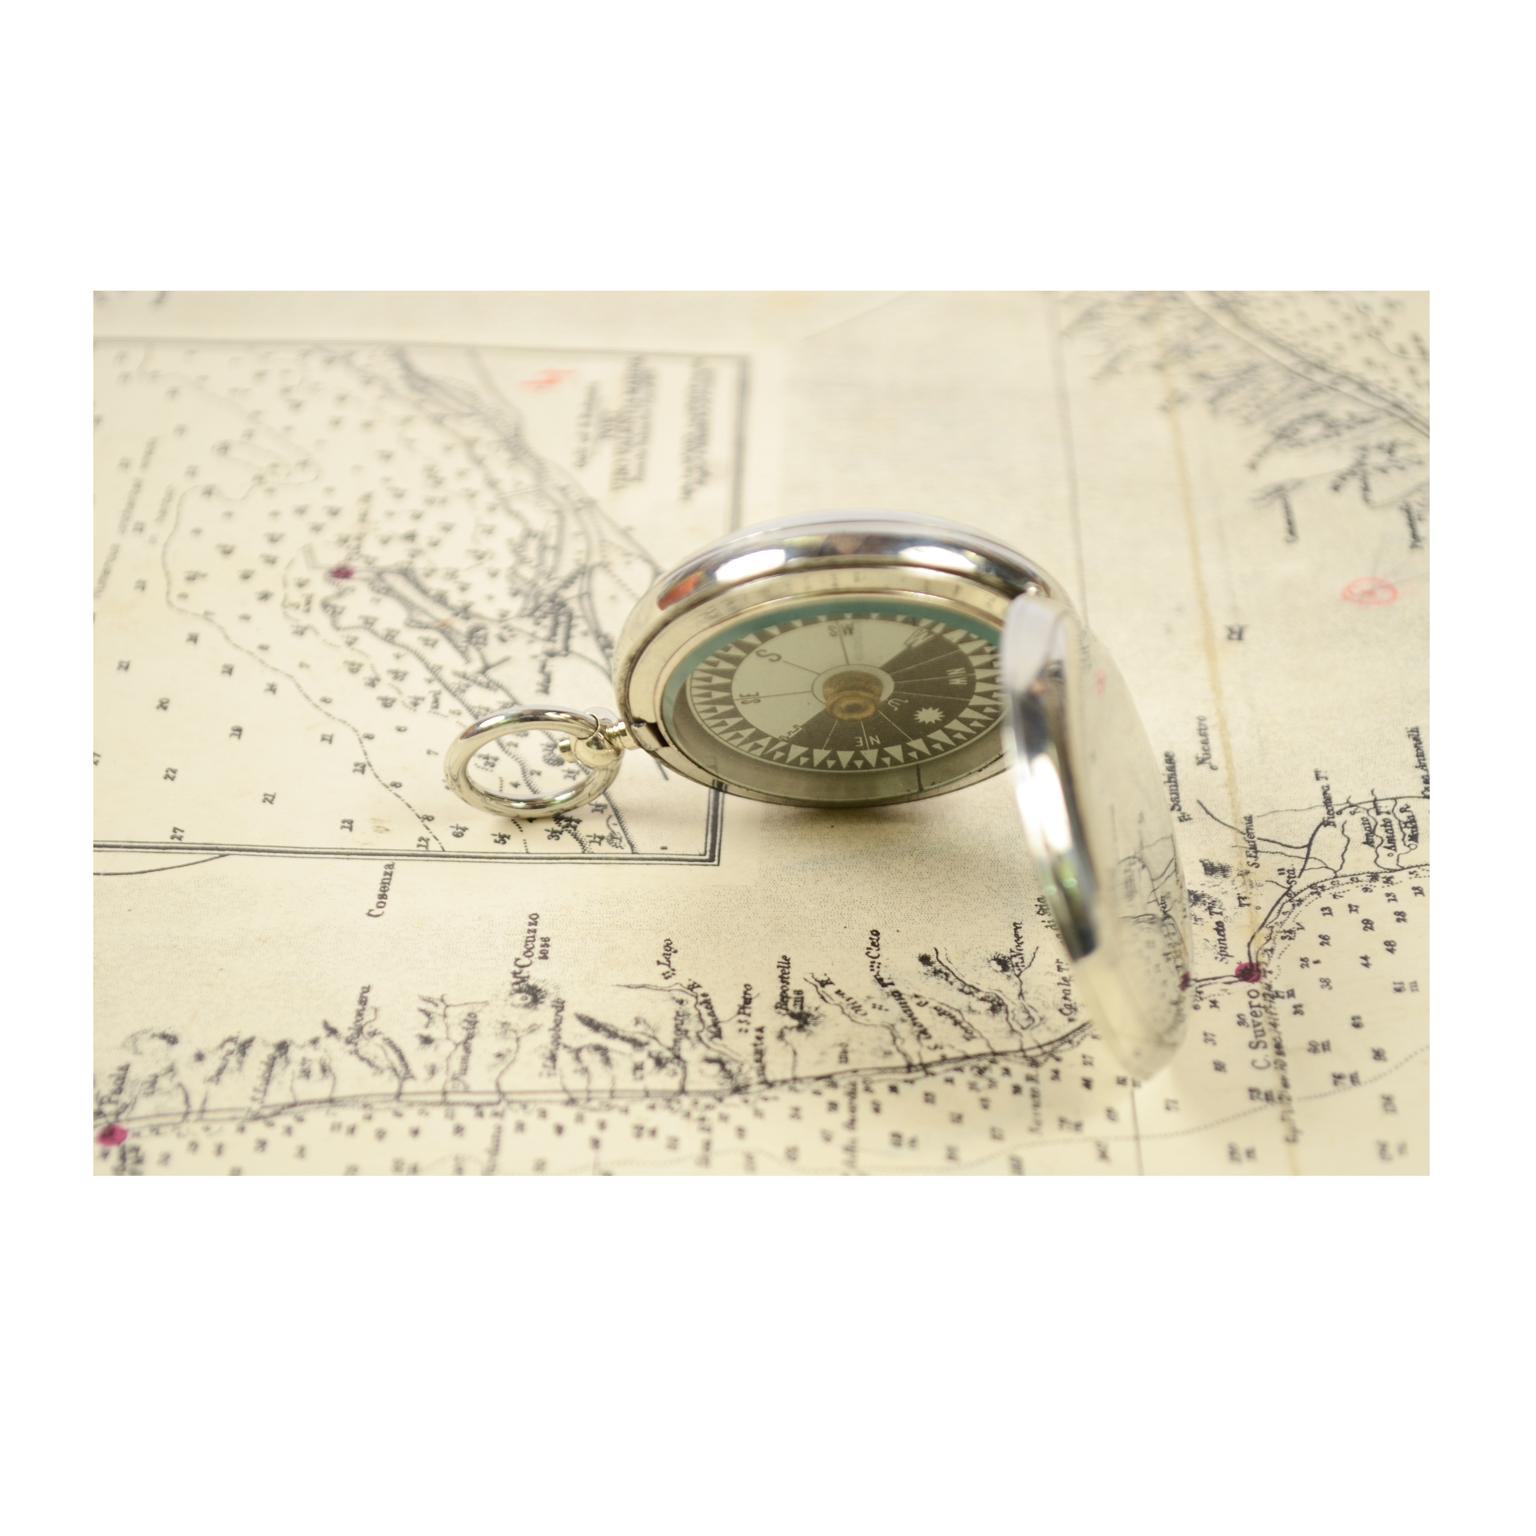 Early 20th Century Pocket Compass for the RAF Officers 1916